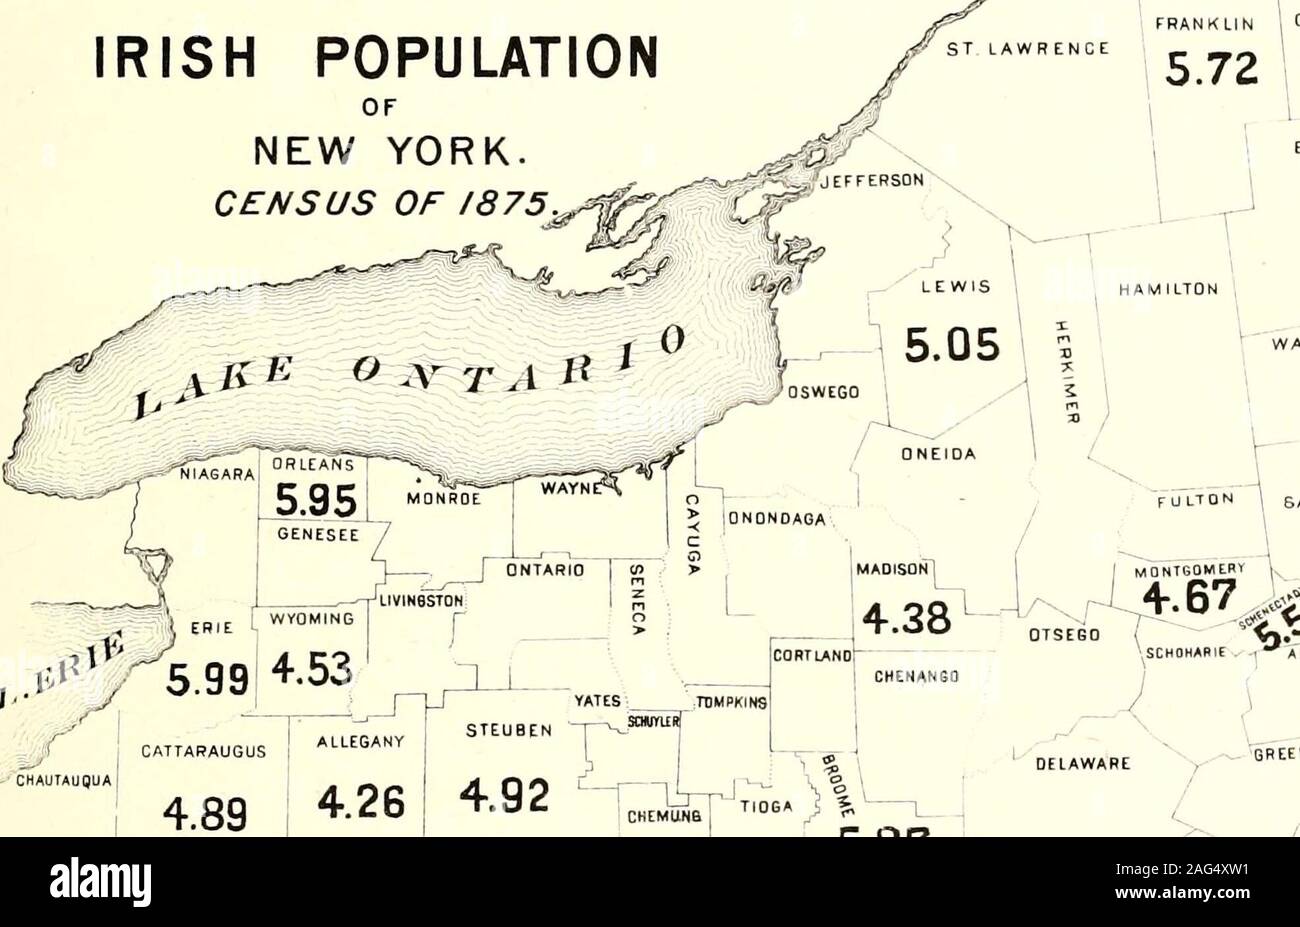 . Census of the state of New York for 1875. IRISH POPULATION OF NEW YORK.CENSUS OF 1875. FRANKLIN i CLINTON A ( (^ 5.72 4.74!§ ESSEX ^^^ Counties. V- - ^  T WARBEtJ I I Erie,i Orleans,Broome,Franklin,Schenectady,Sullivan,Lewis,Steuben,Cattaraugus,Clinton,I Montgomery,WASKiN6T0Ni Suffolk, ; Wyoming, I Madison, fulton! SARATOGA Allegany. 1 PerCt, 31 5,99 32 5,95 33 5.87 • 34 5.72 35 5.51 36 5.26 37 5.05 38 4.92 39 4.89 40 4,74 I 41 4.67 i ^2 4.59 ! 43 4.53 1 44 4 38 1 45 4.26 1 RENSSELAER; OTSEGO ( Vj. :  SCH0HARIE . -i ALBANY / / - —7COLur^BIA / 4.89 426 I 4.92 L L . ^  TIOGA i ^ - I i  5. Stock Photo